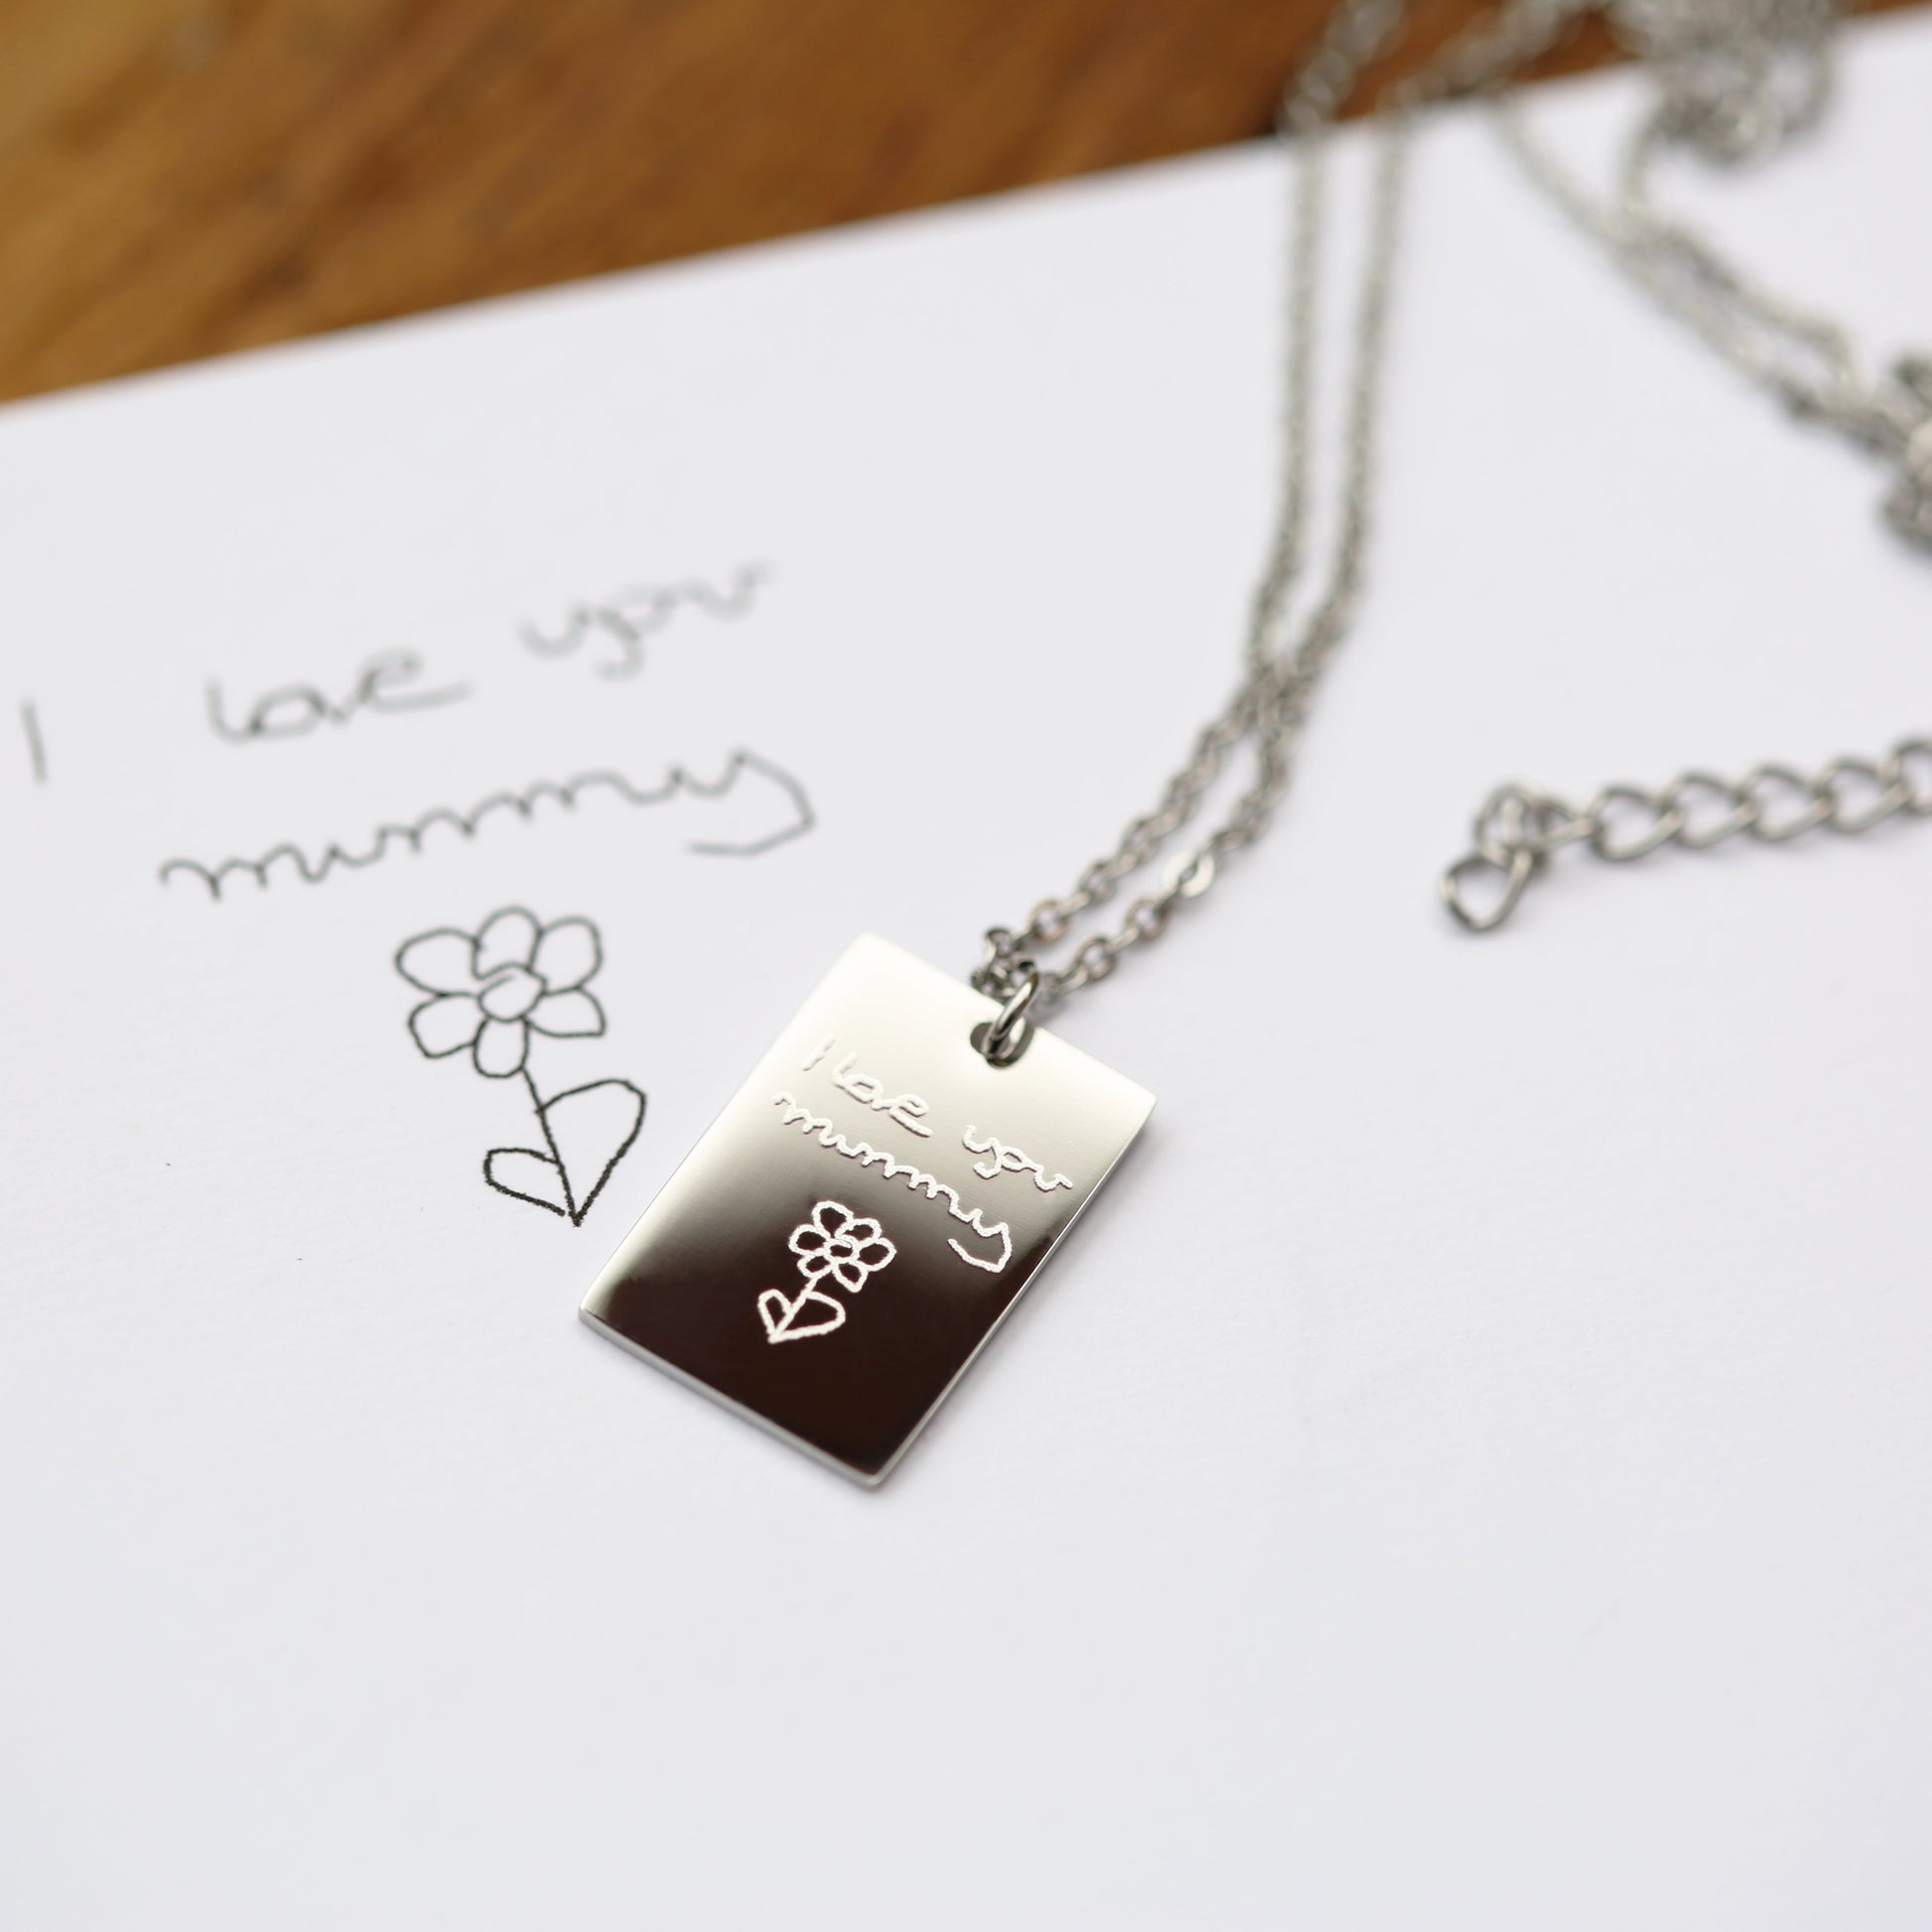 Personalized Necklaces - Dazzle Personalized Necklace - Own Handwriting Engraving 